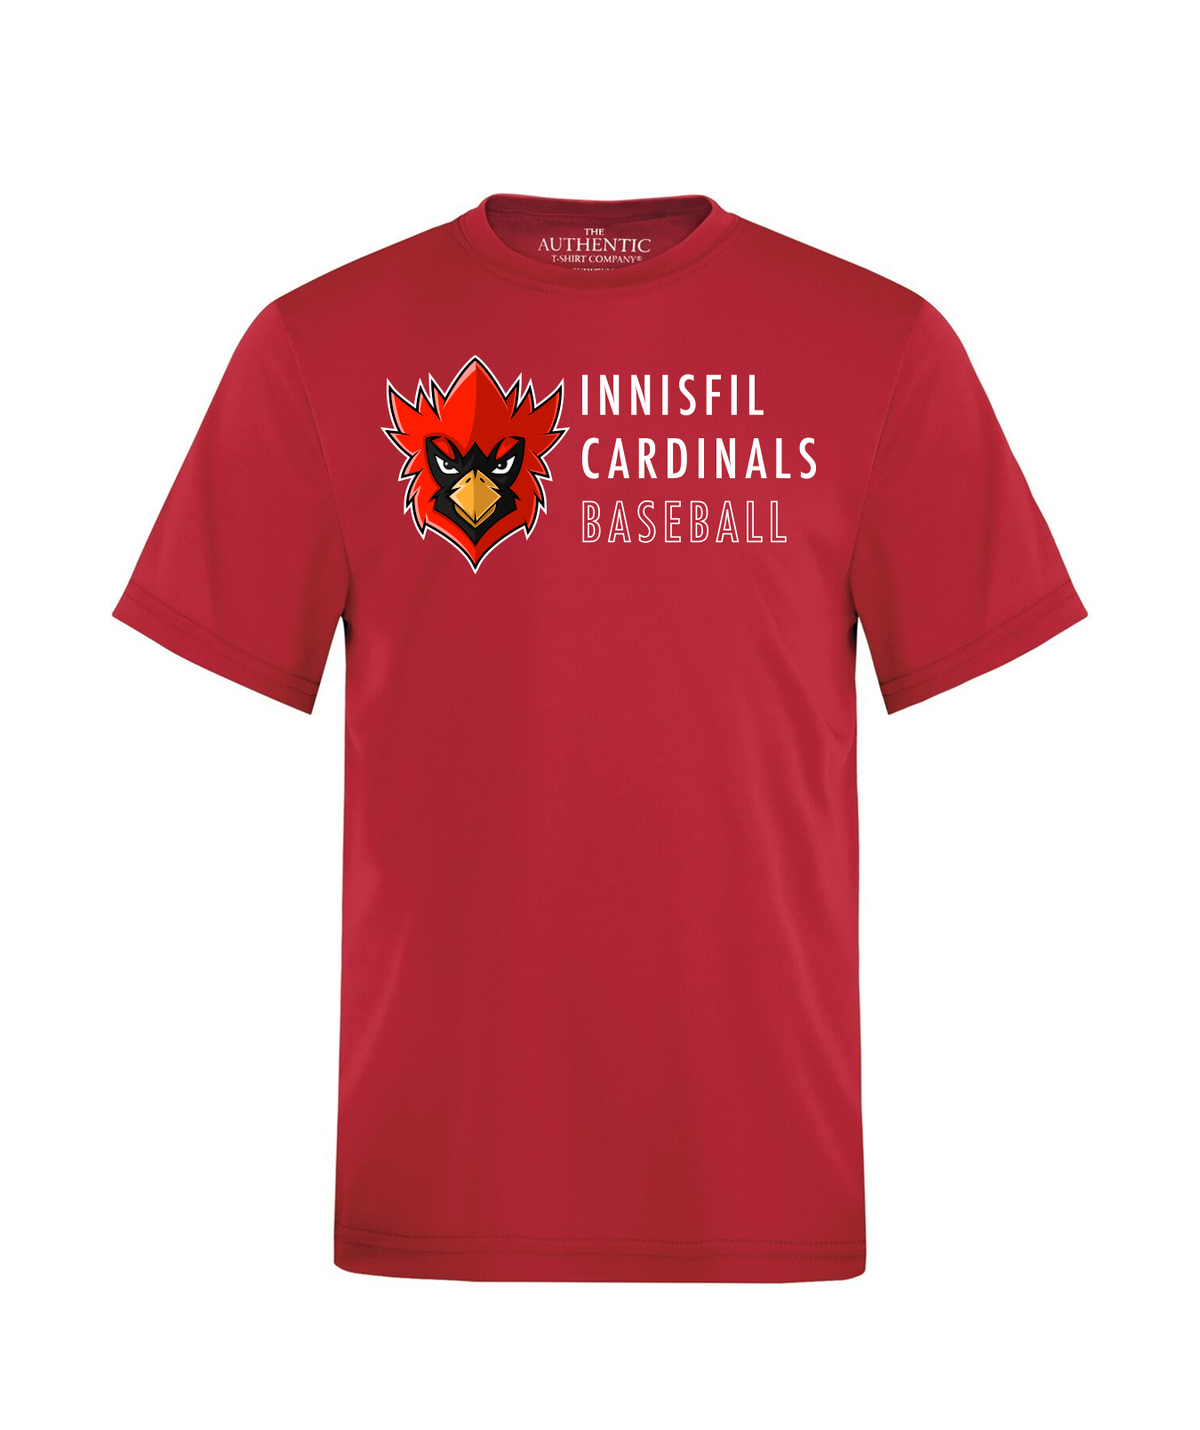 Innisfil Cardinals Pre-Game T-Shirt - Red